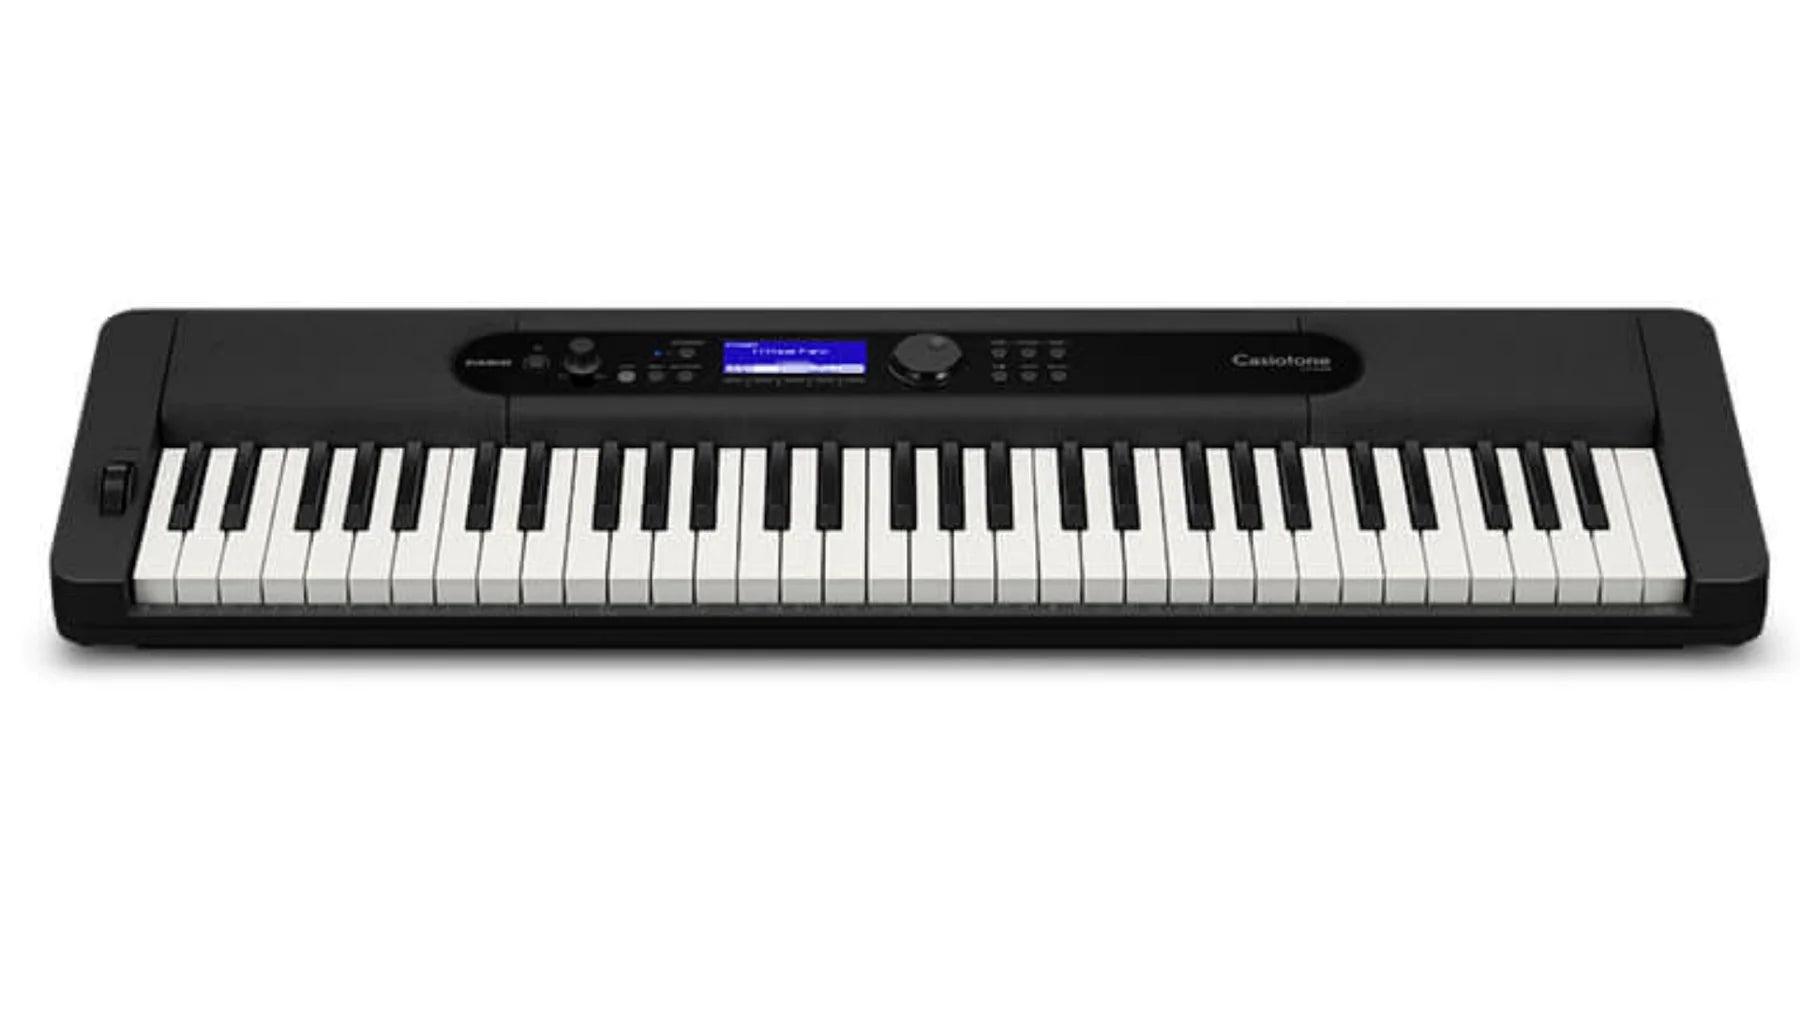 CASIO CTS400 Keyboard - Keyboards by Casio at Muso's Stuff